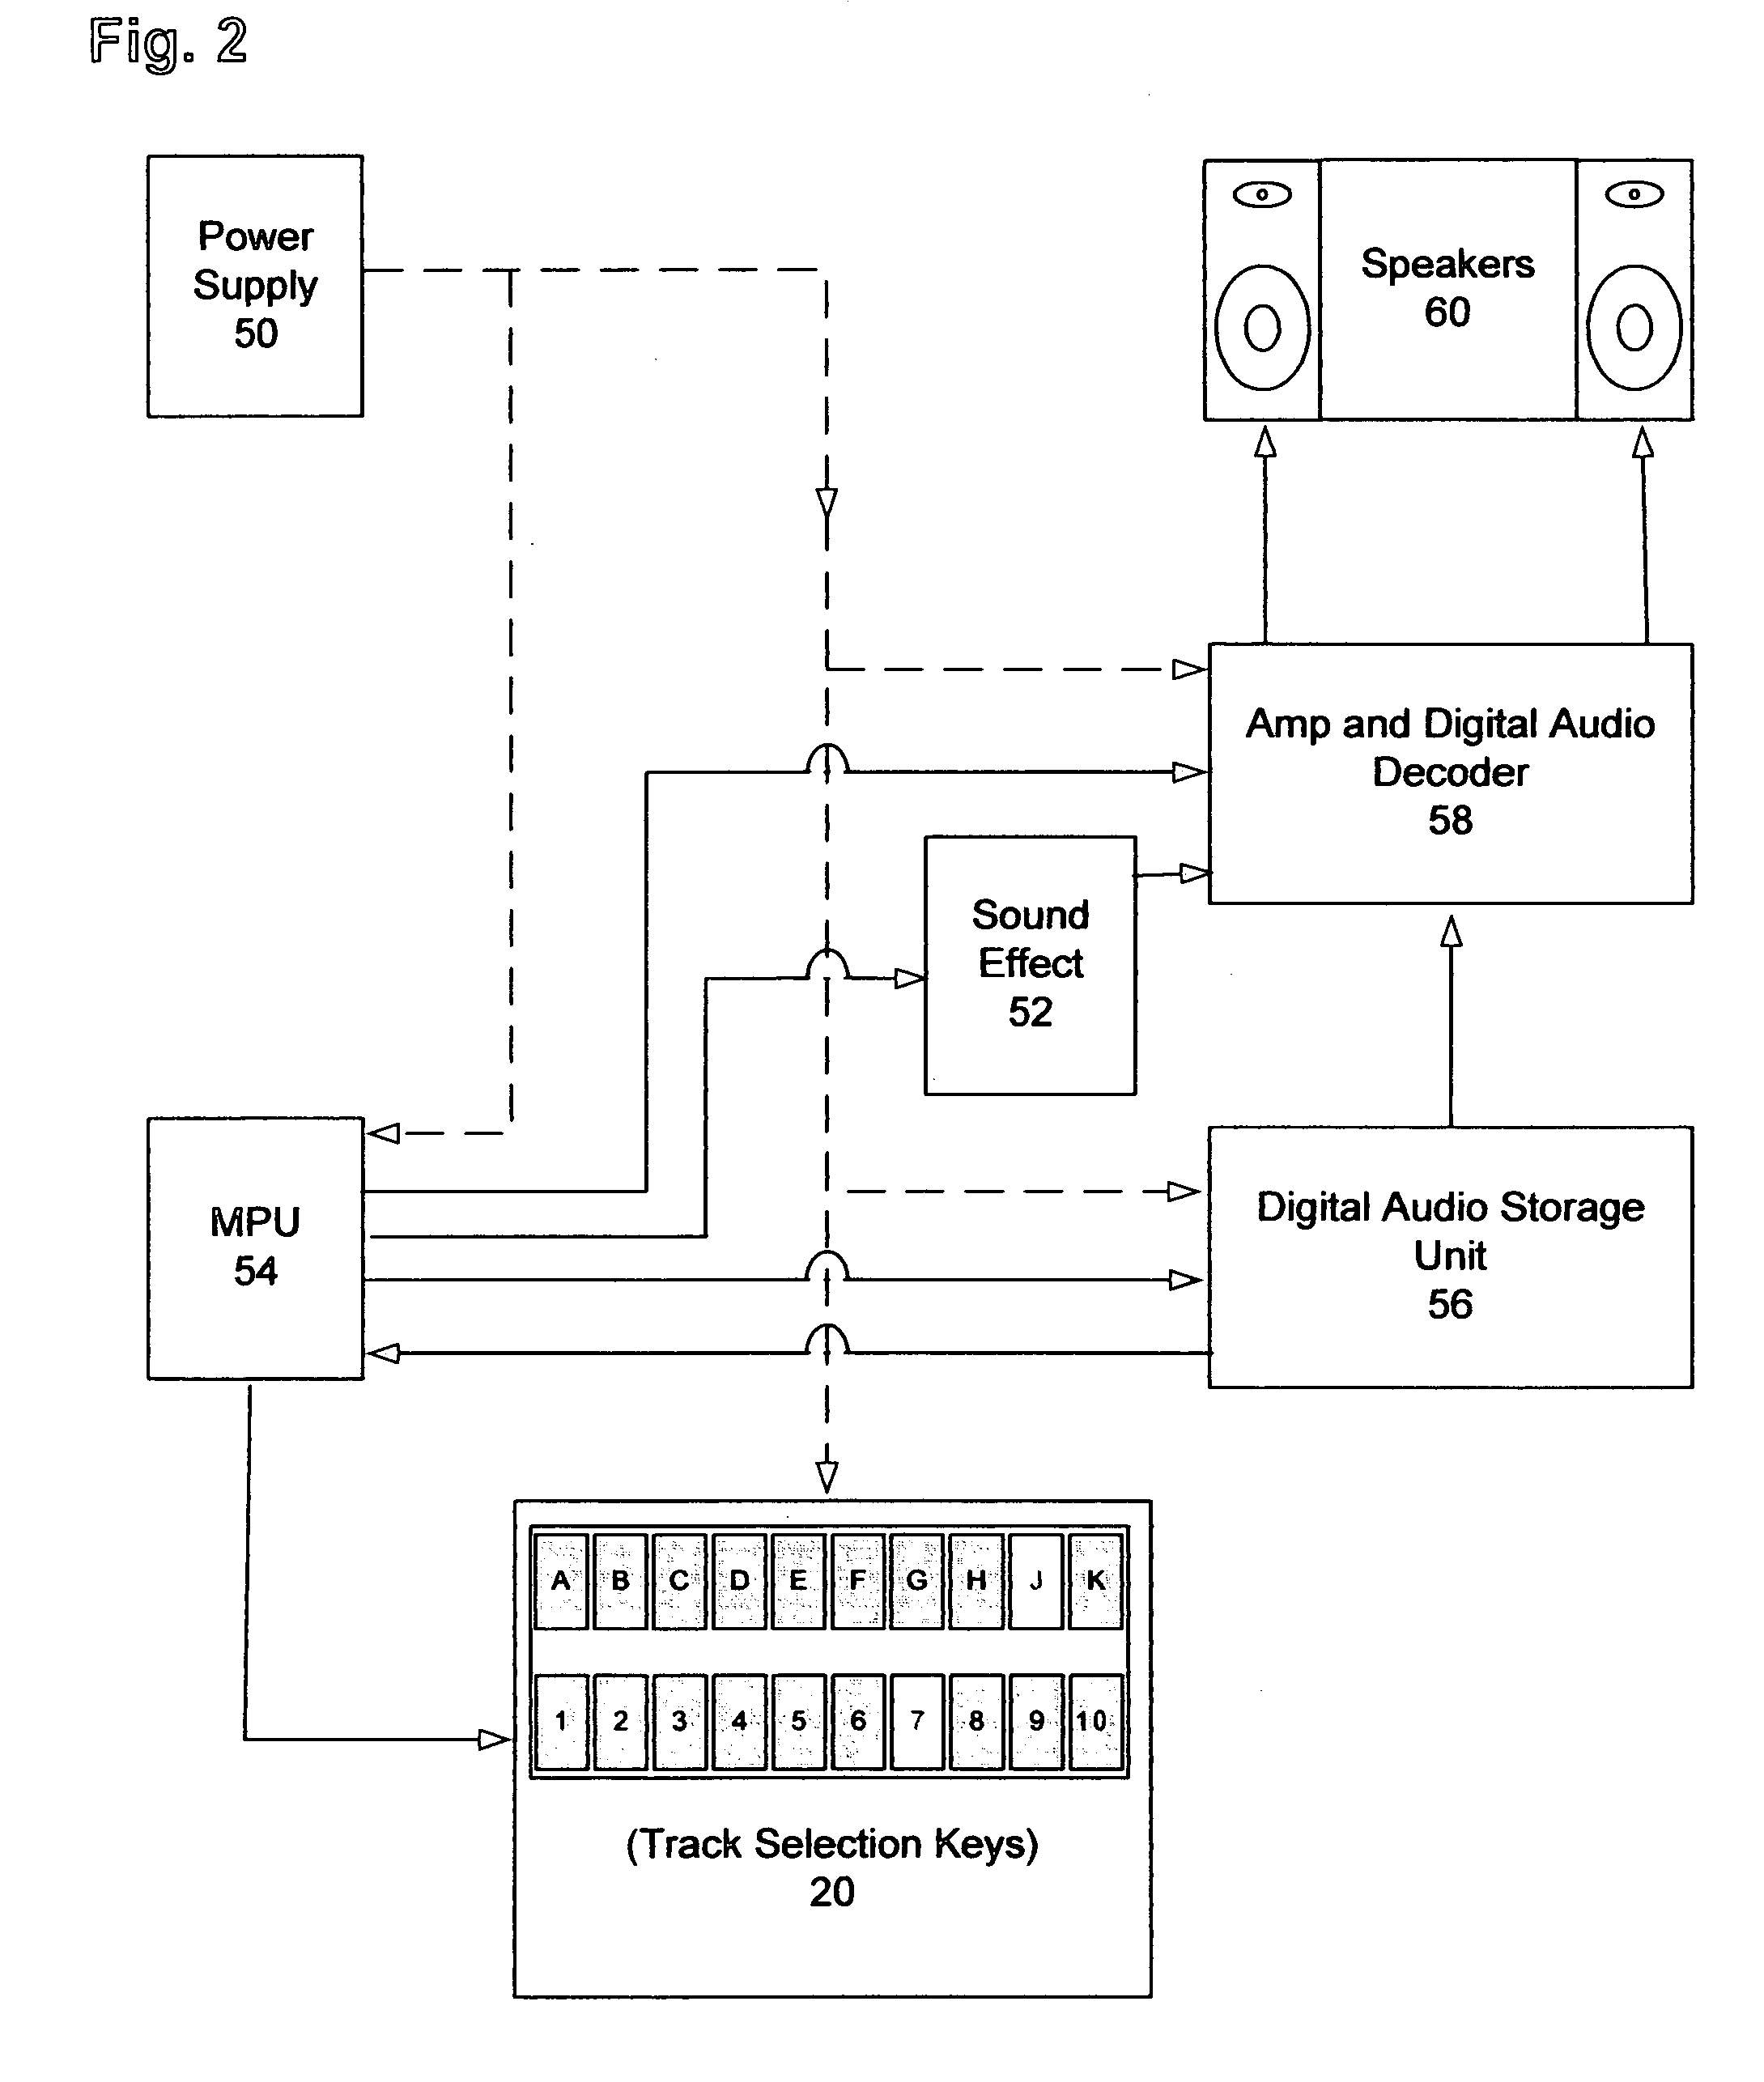 Sound effects method for masking delay in a digital audio player